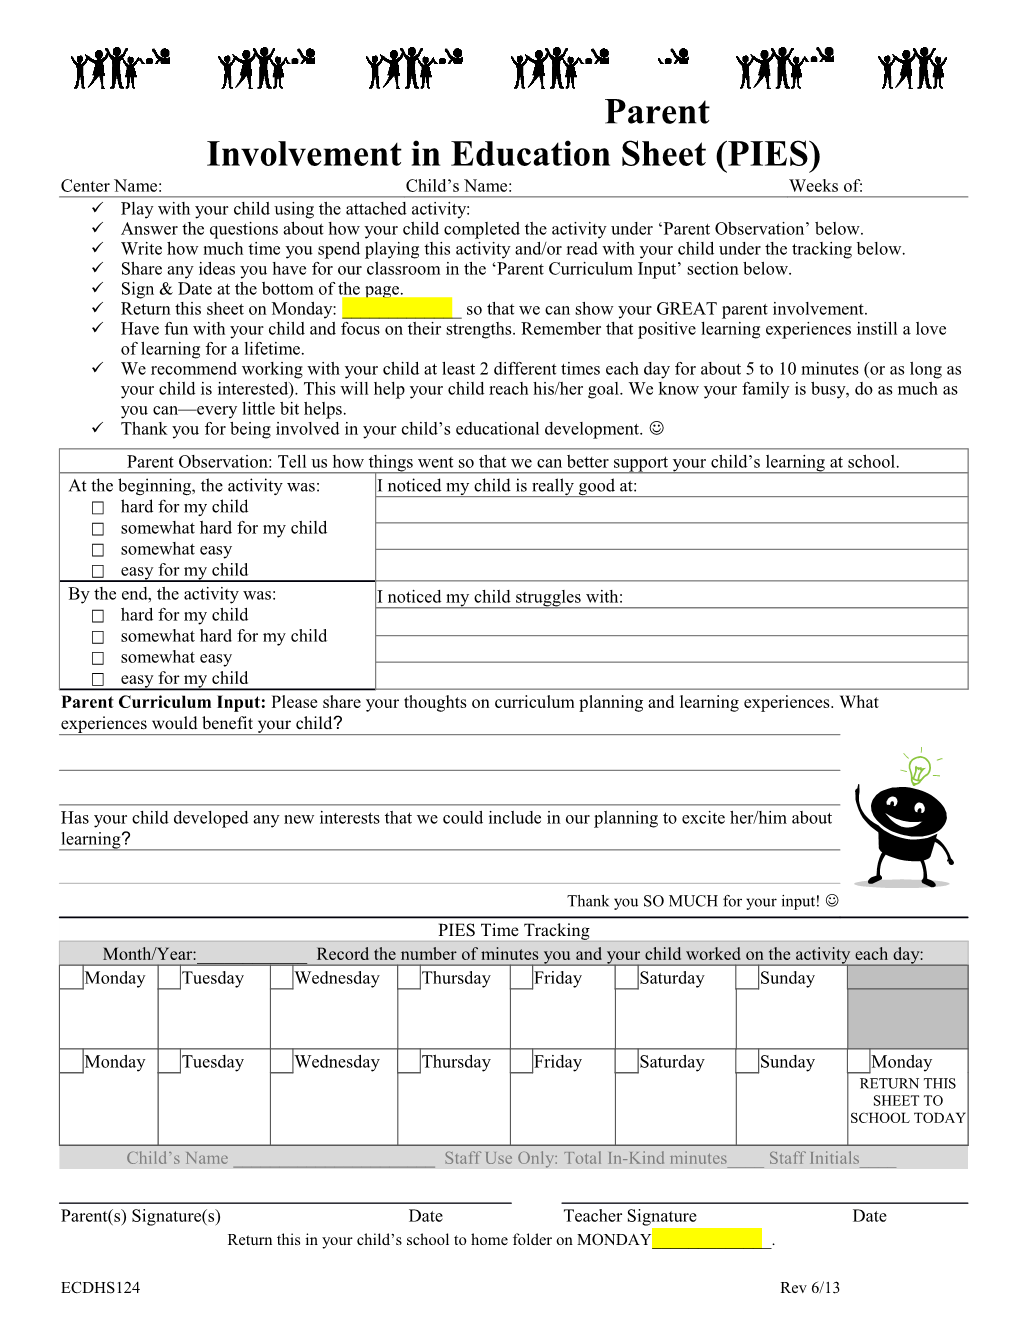 Parent Involvement in Education Sheet (PIES)